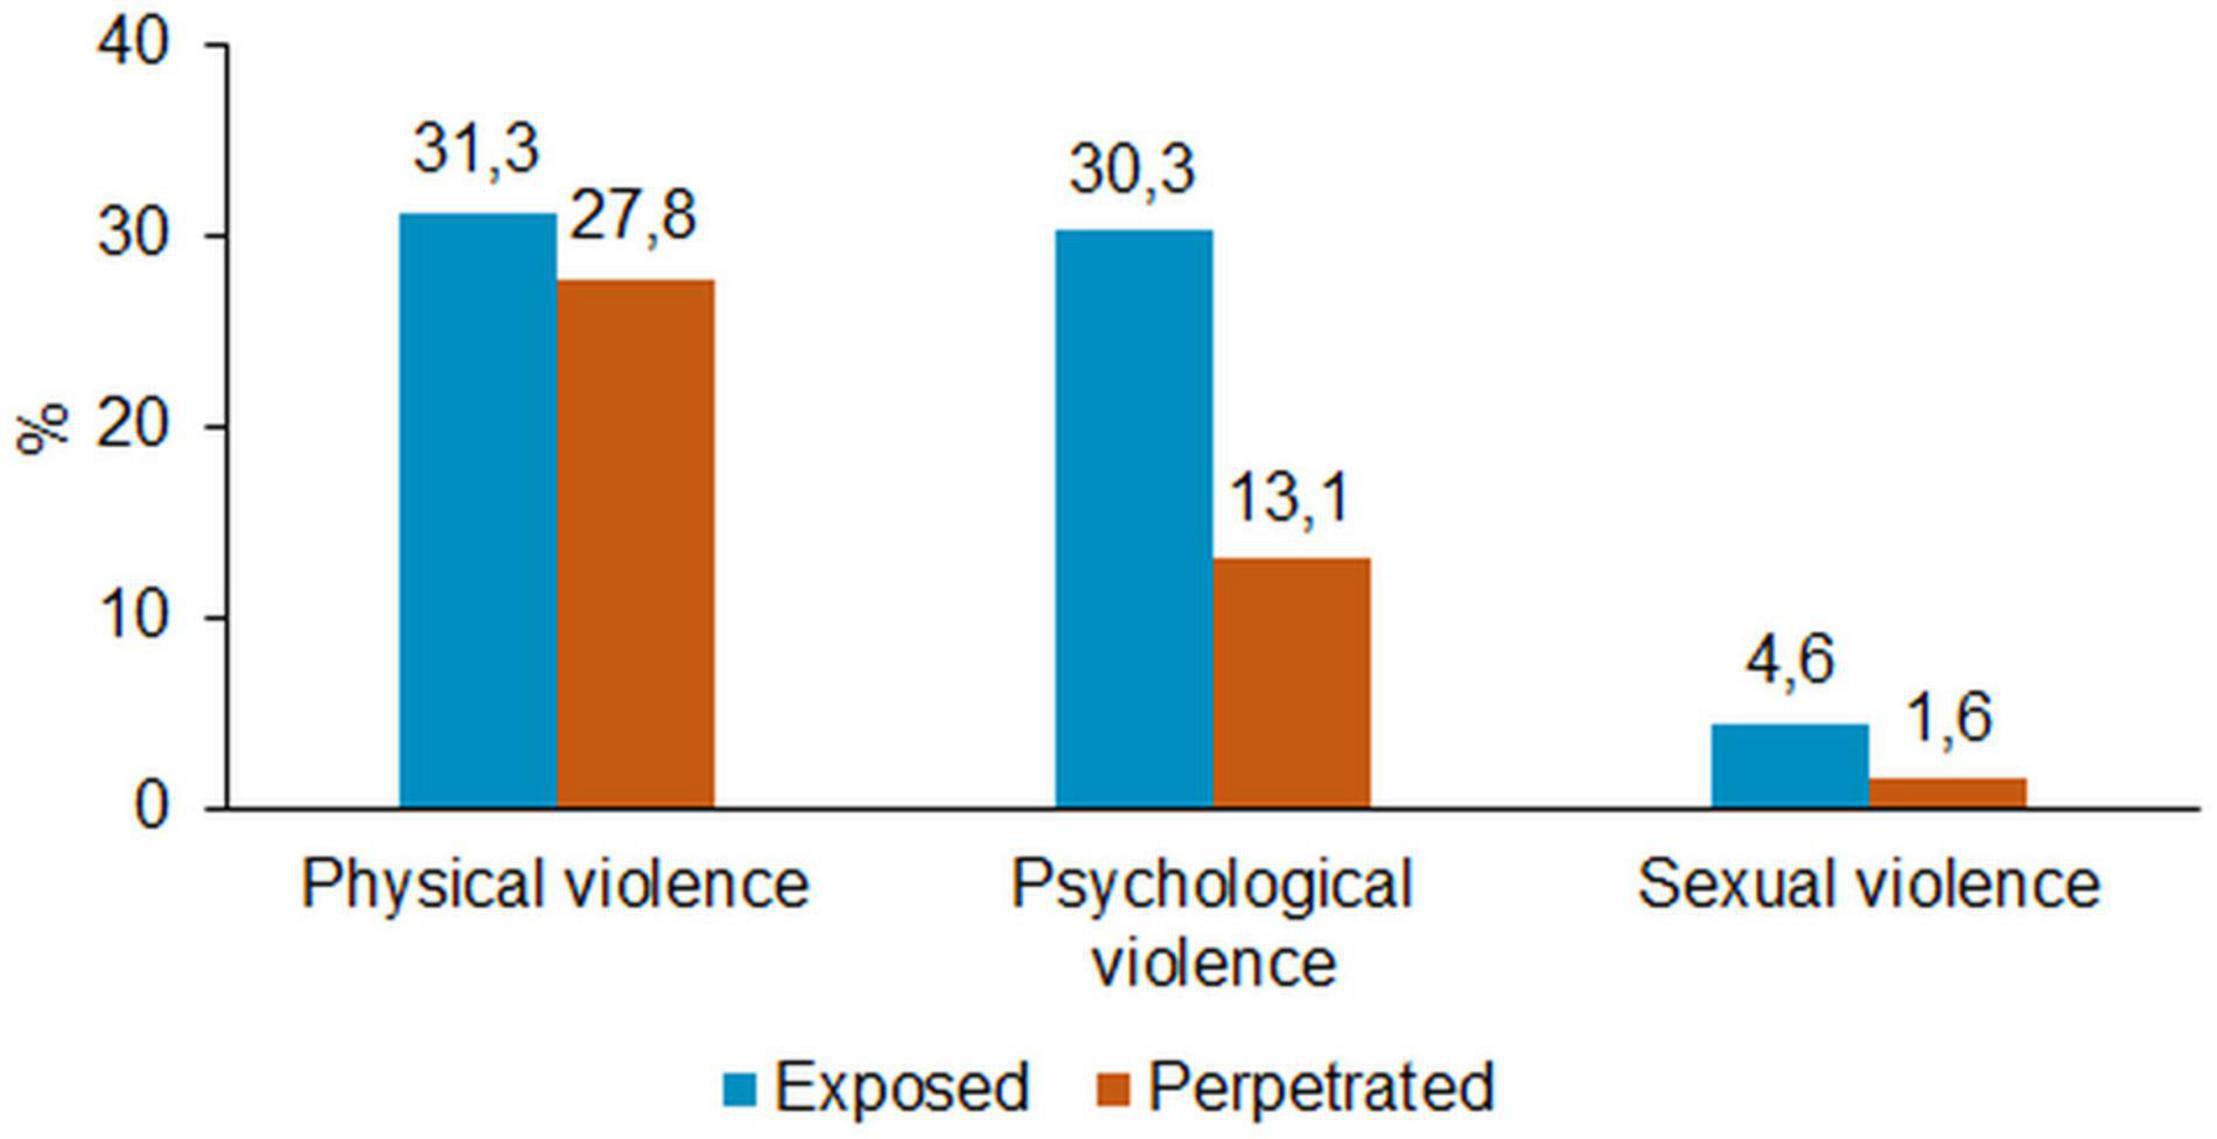 Locations for victimization, age and gender of perpetrator(s) for